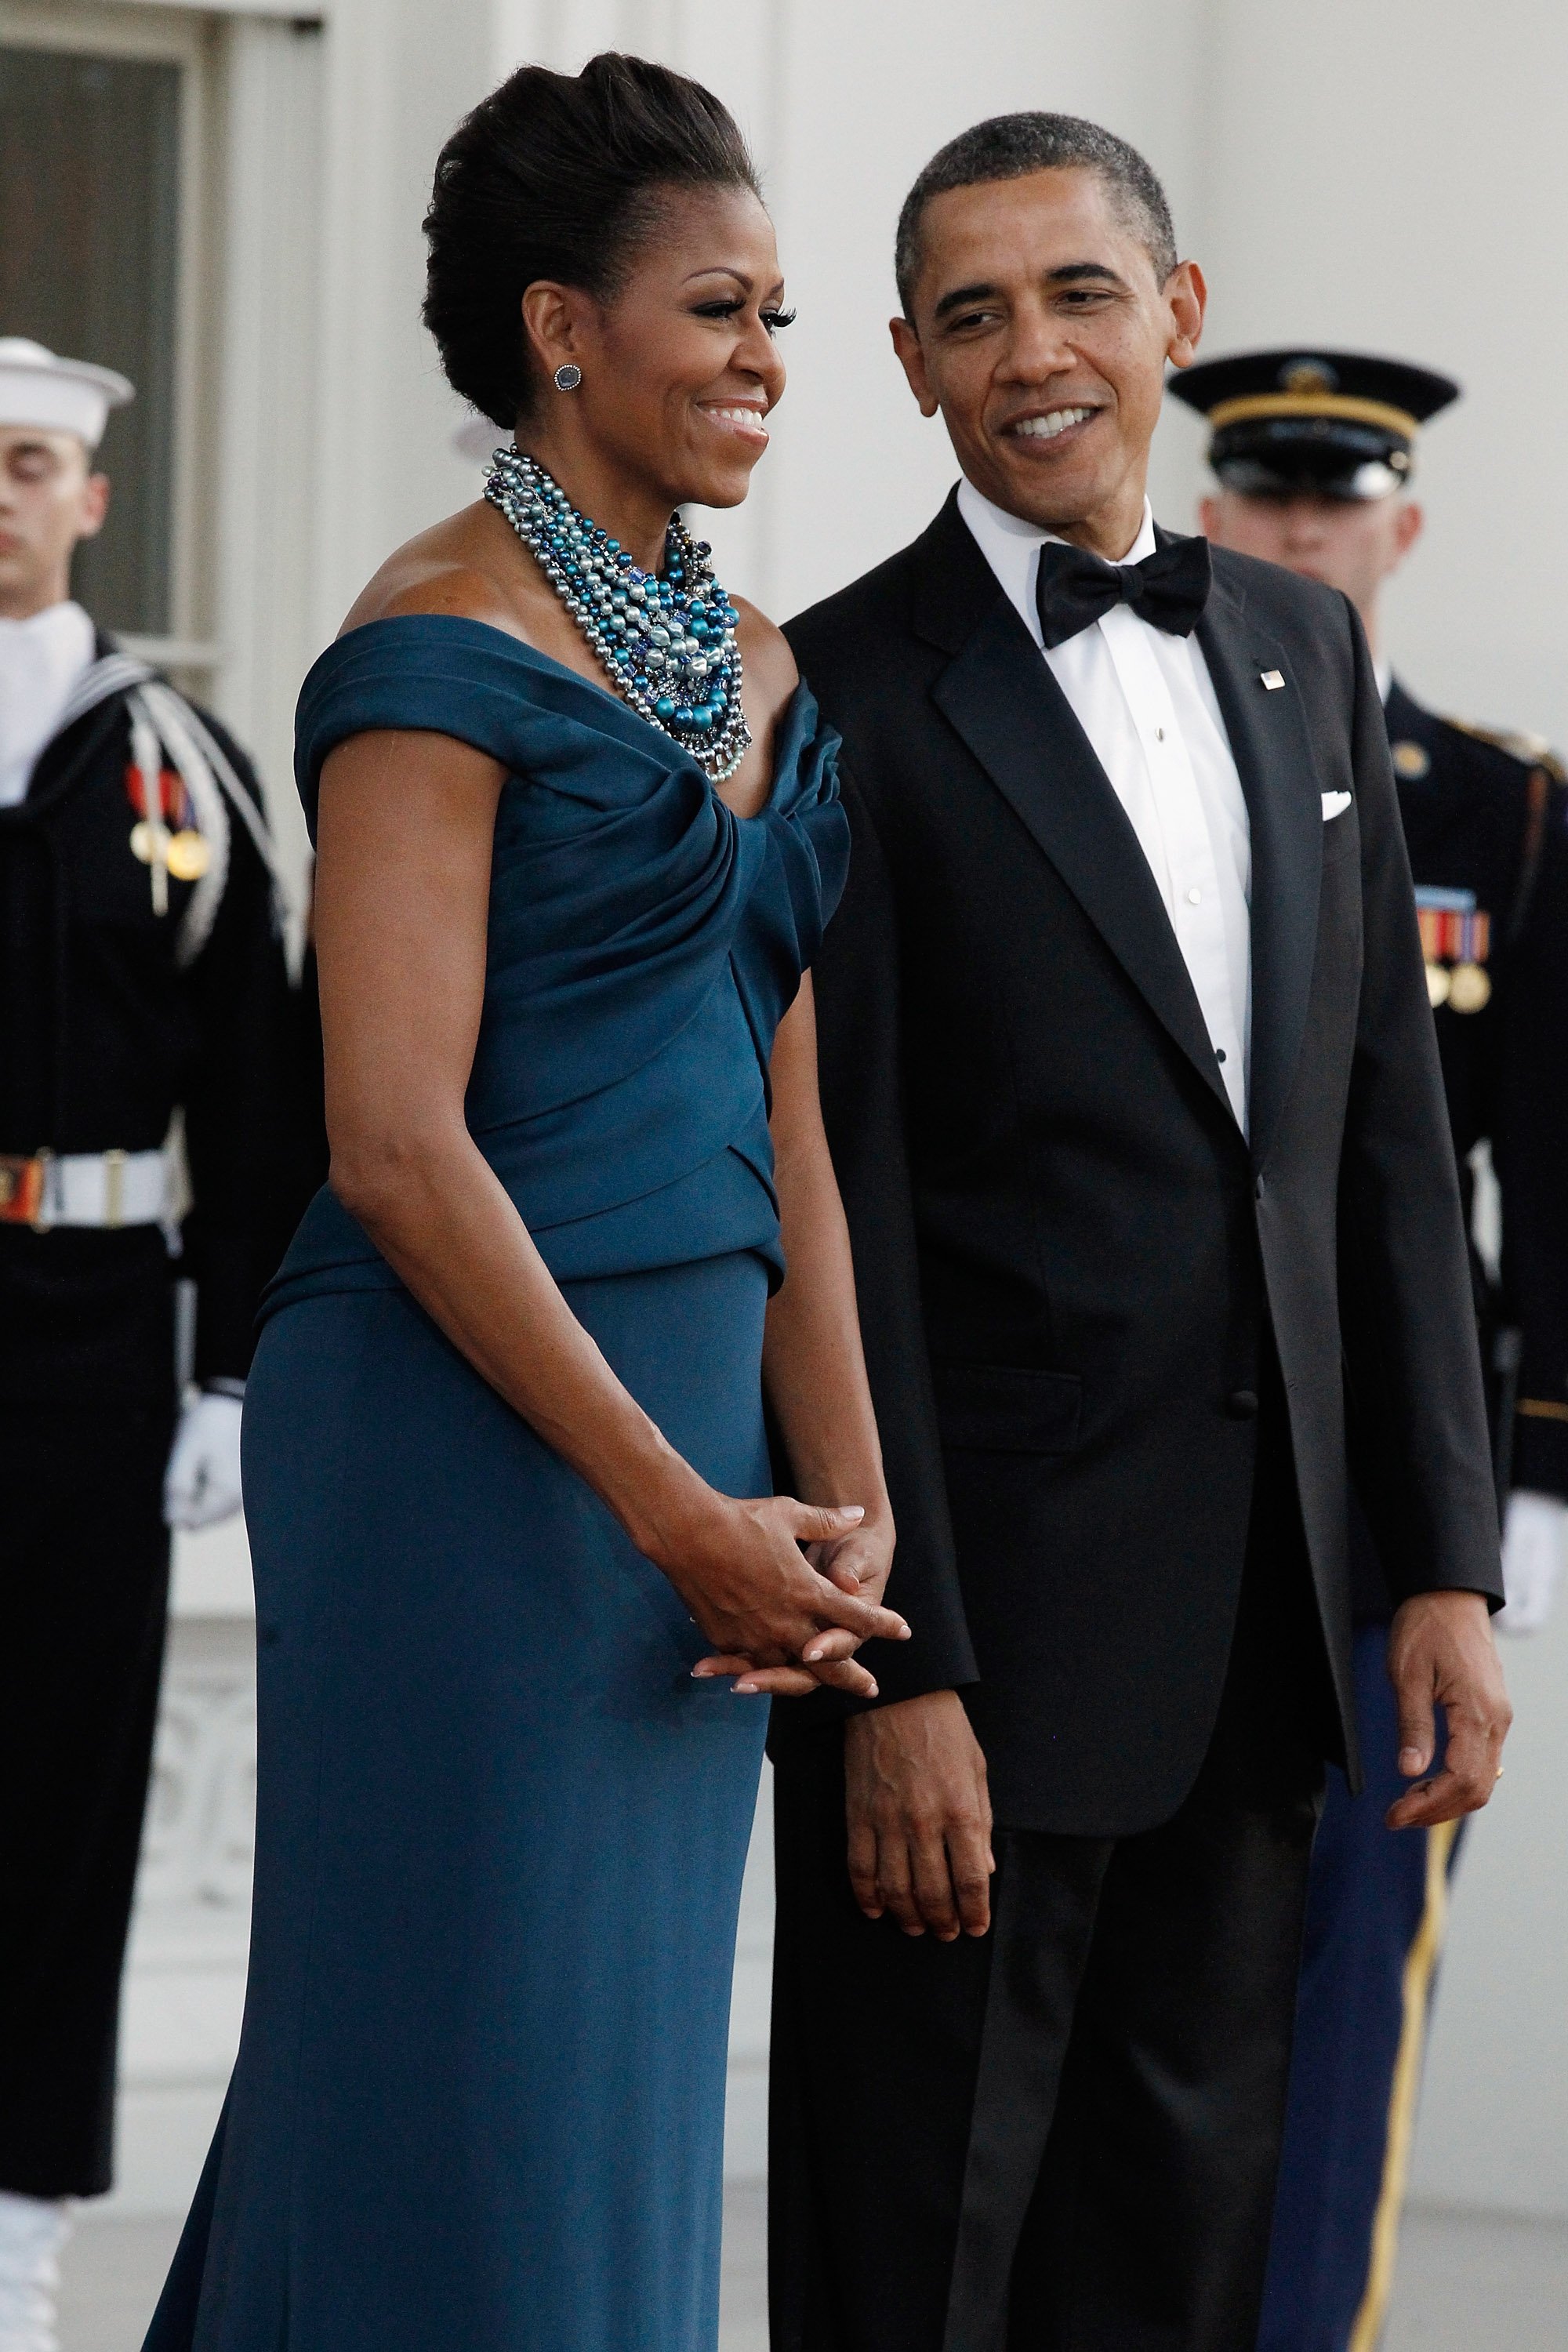 First Lady Michelle and U.S. President Barack Obama await the arrival of British Prime Minister David Cameron and his wife Samantha at the White House on March 14, 2012 l Source: Getty Images